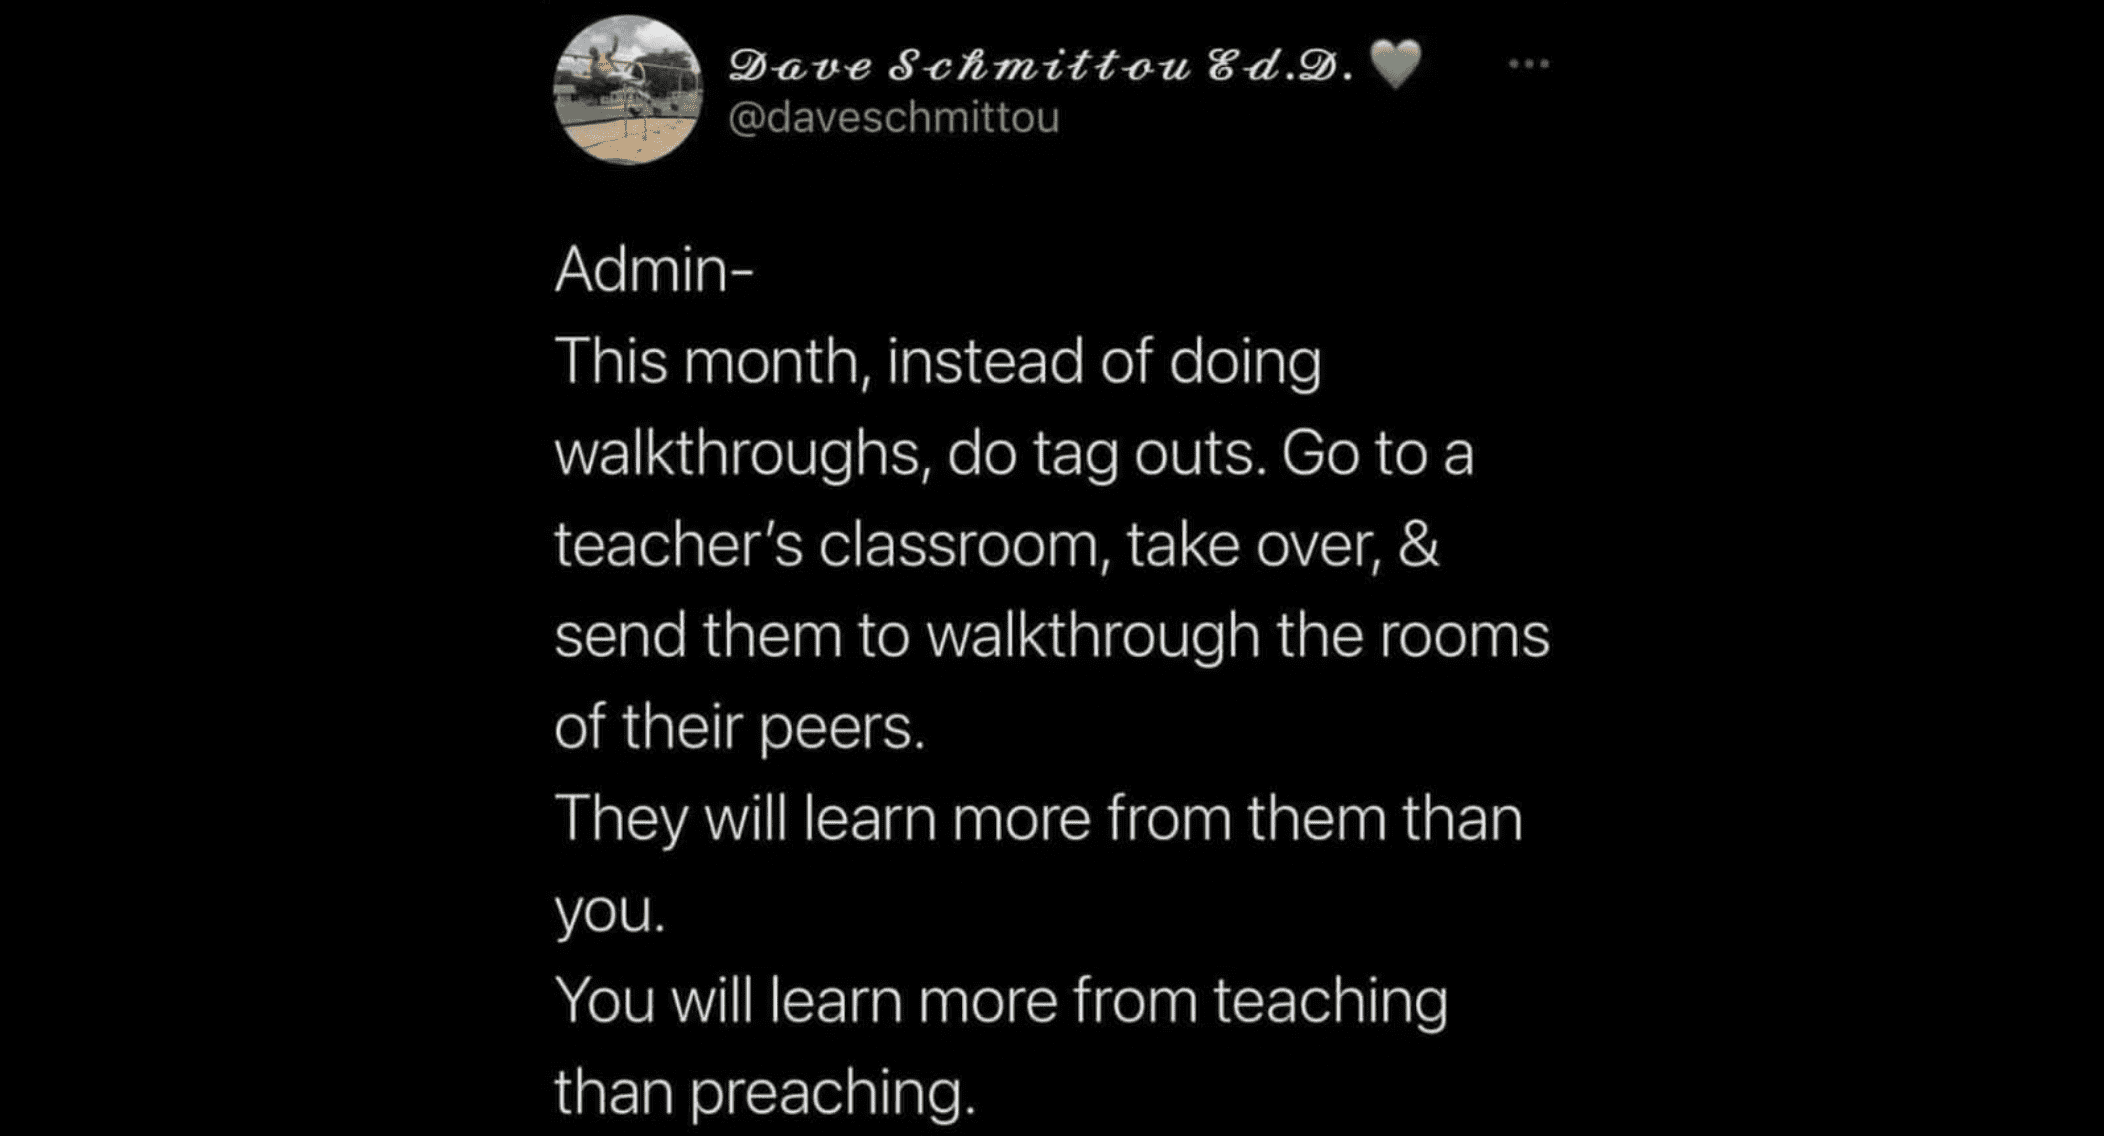 A tweet where it is suggested that more admin need to teach.